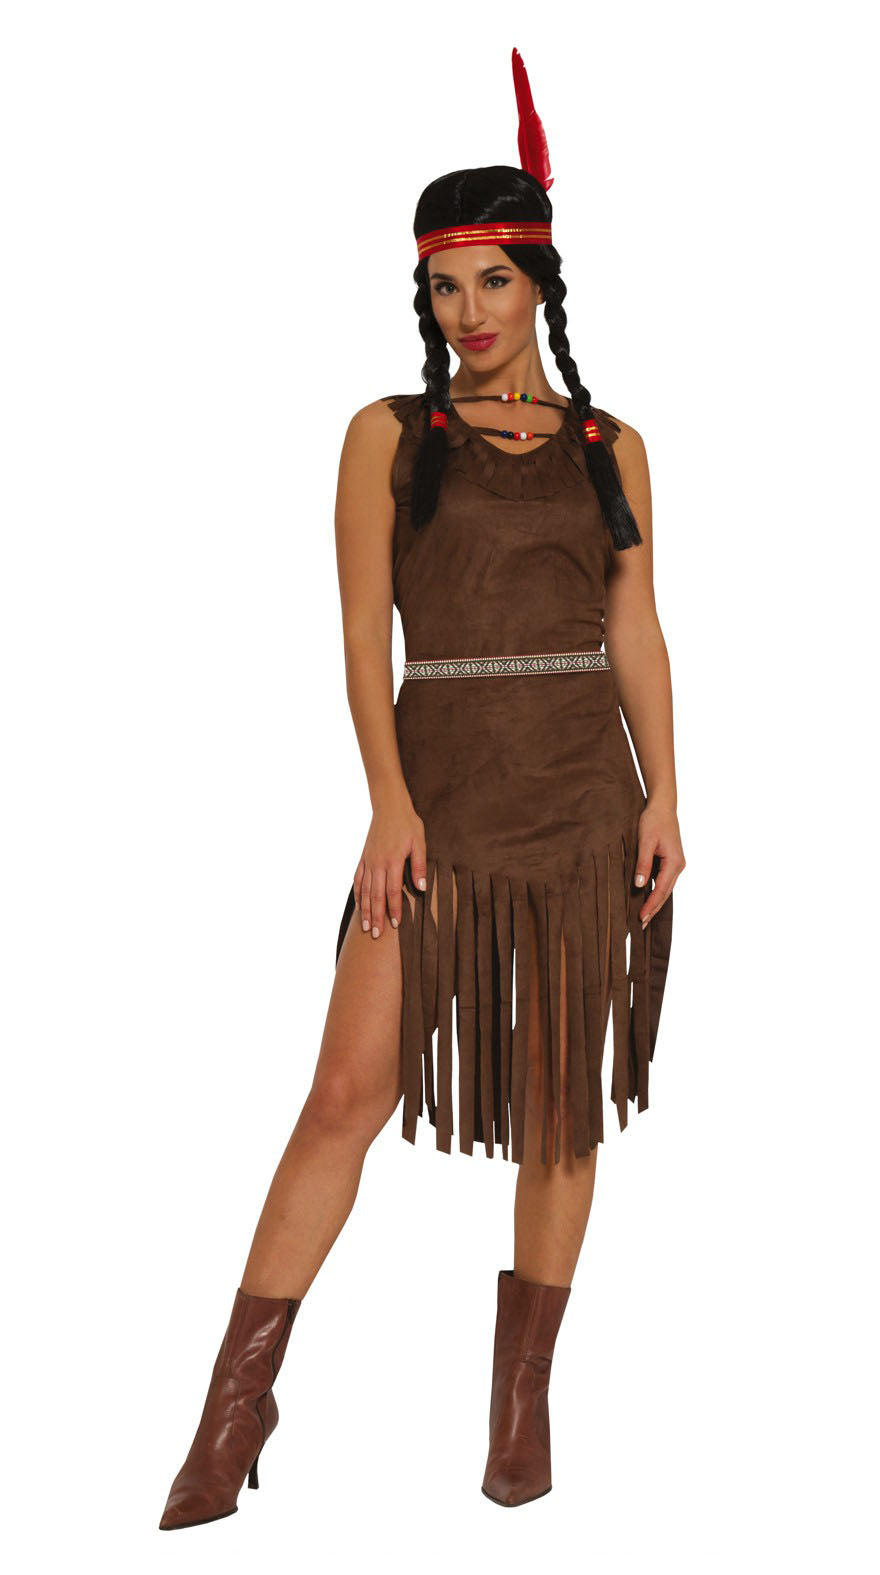 Ladies Indian Costume includes dress, belt and headband